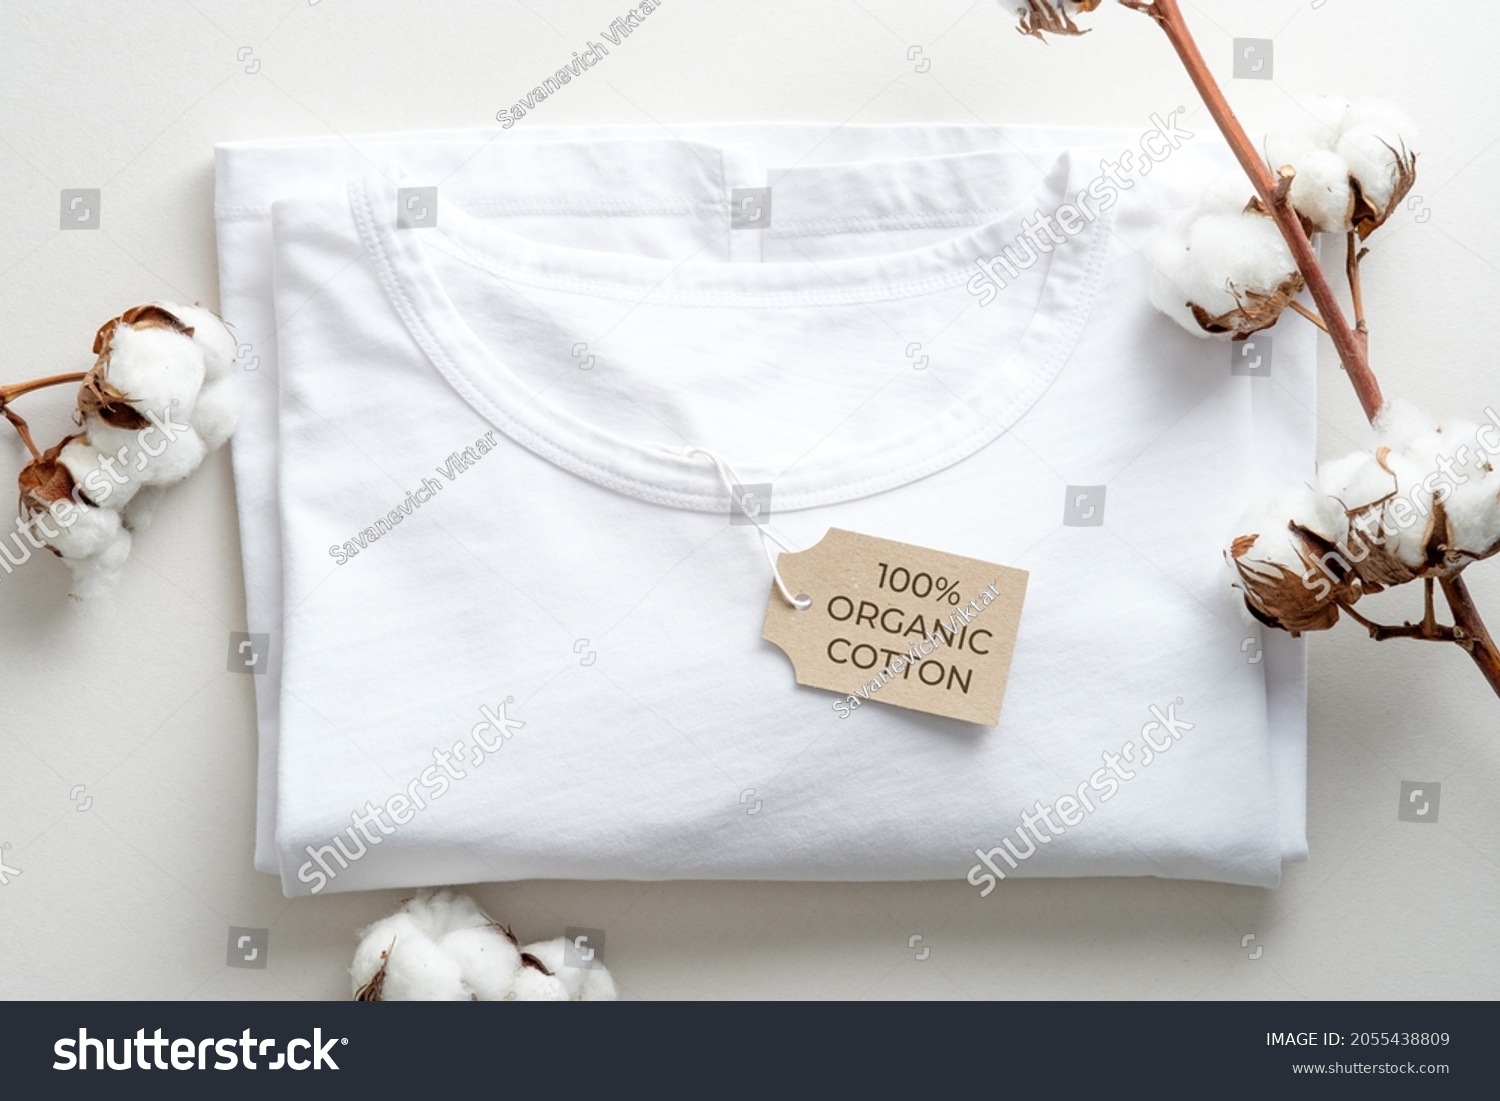 Organic cotton t-shirt with cotton flowers on white background. Flat lay, top view. Eco clothing, sustainable lifestyle, fashion concept. #2055438809